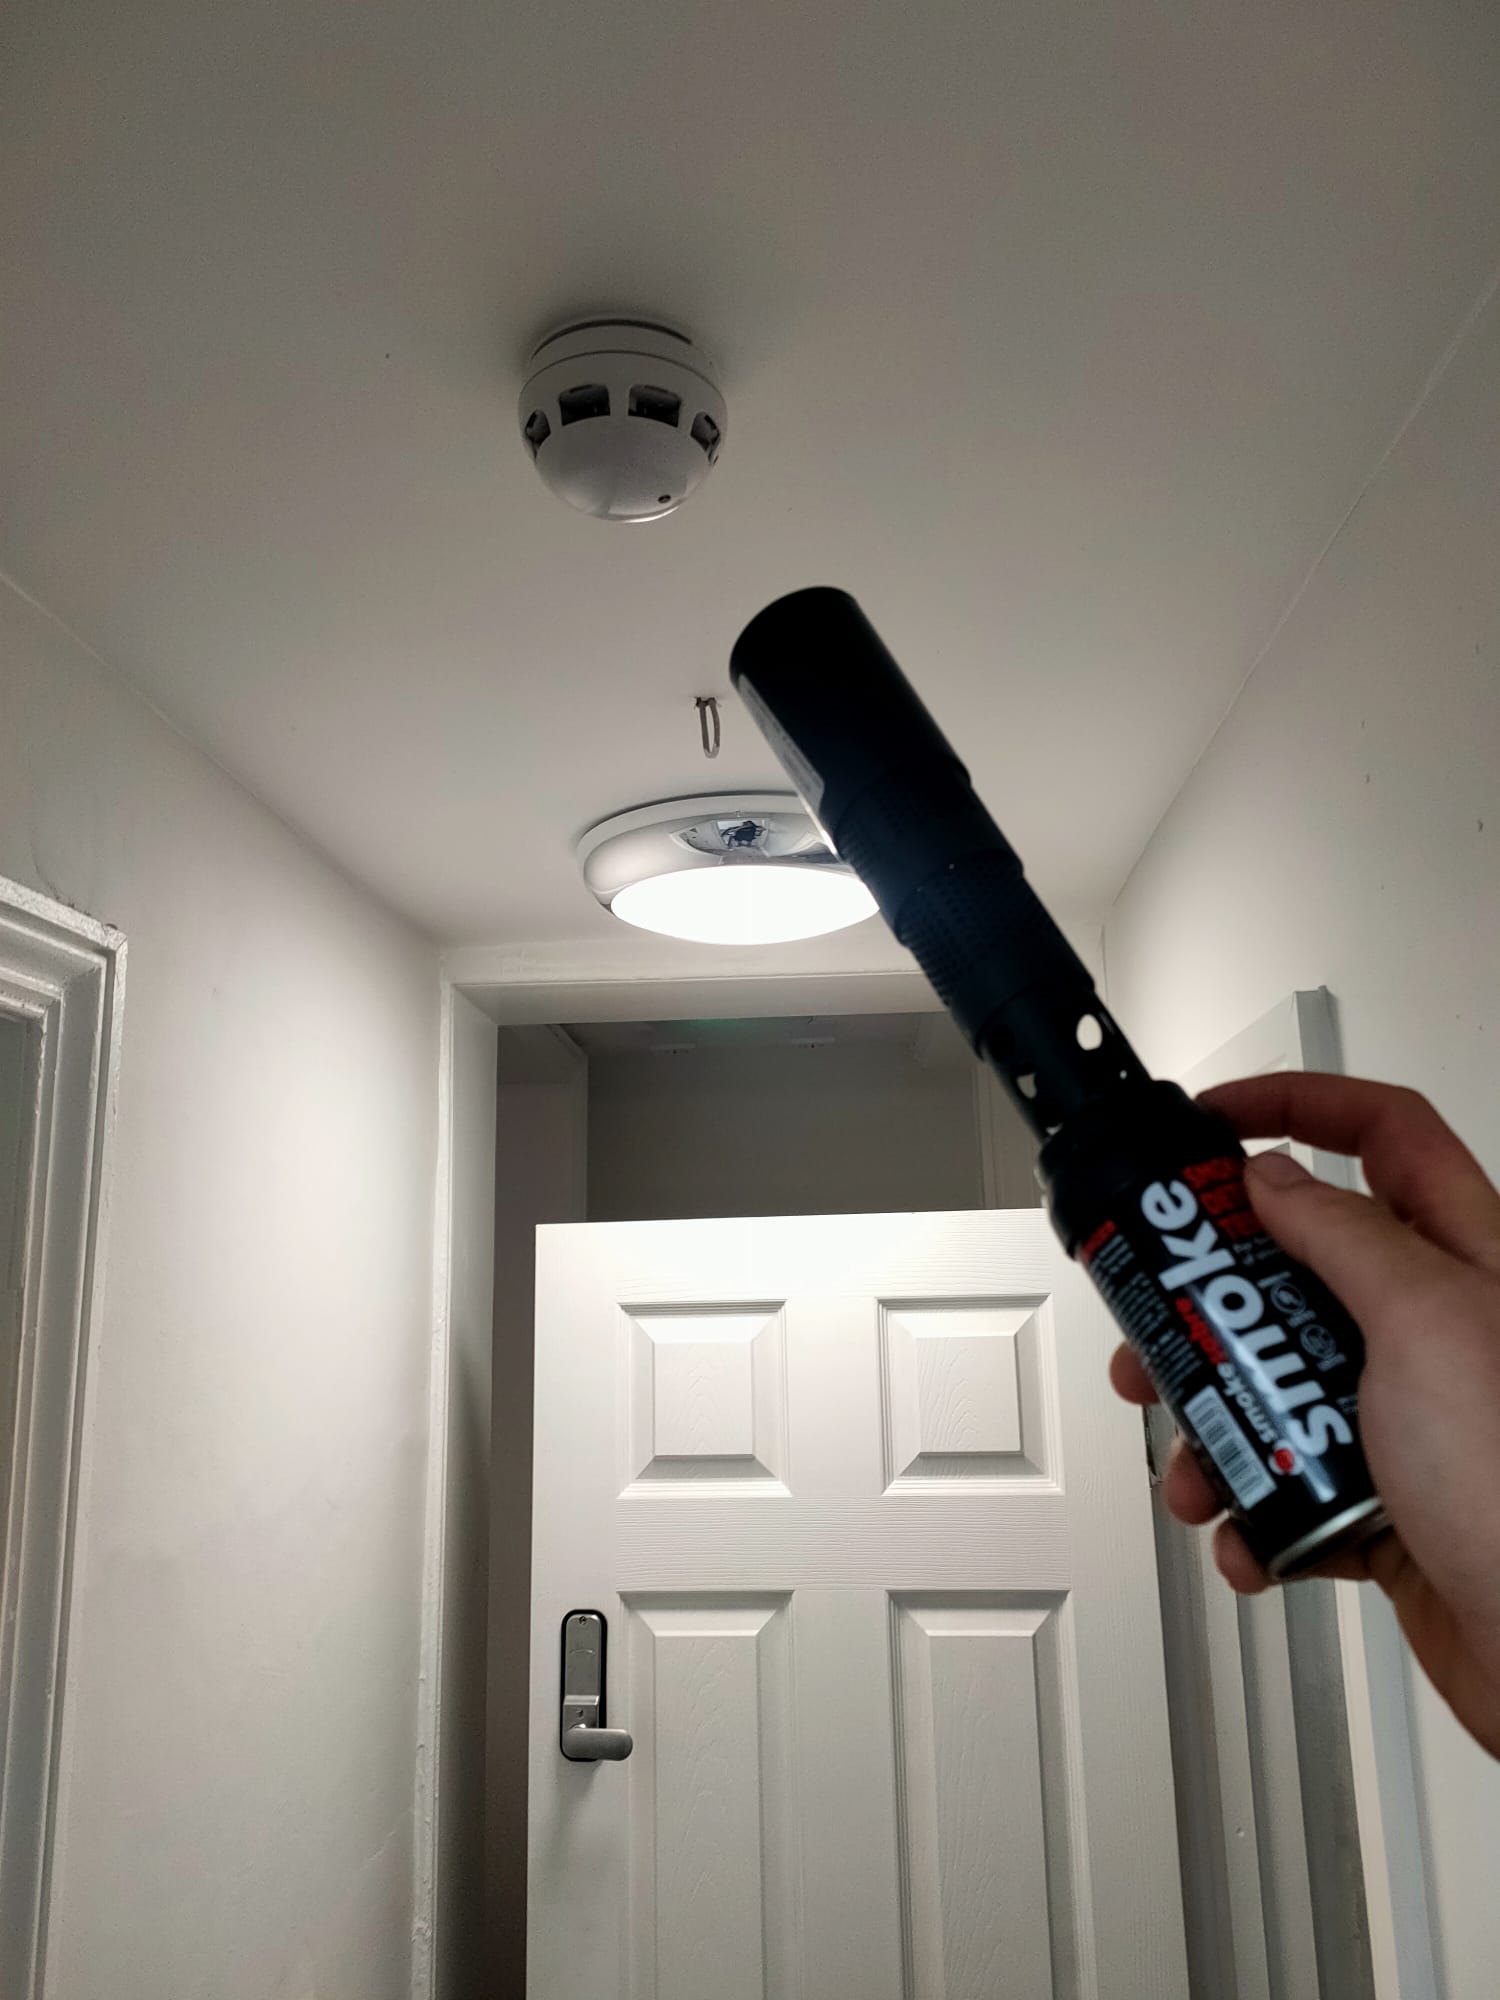 Holding up fake smoke to a smoke detector to ensure it works as expected.